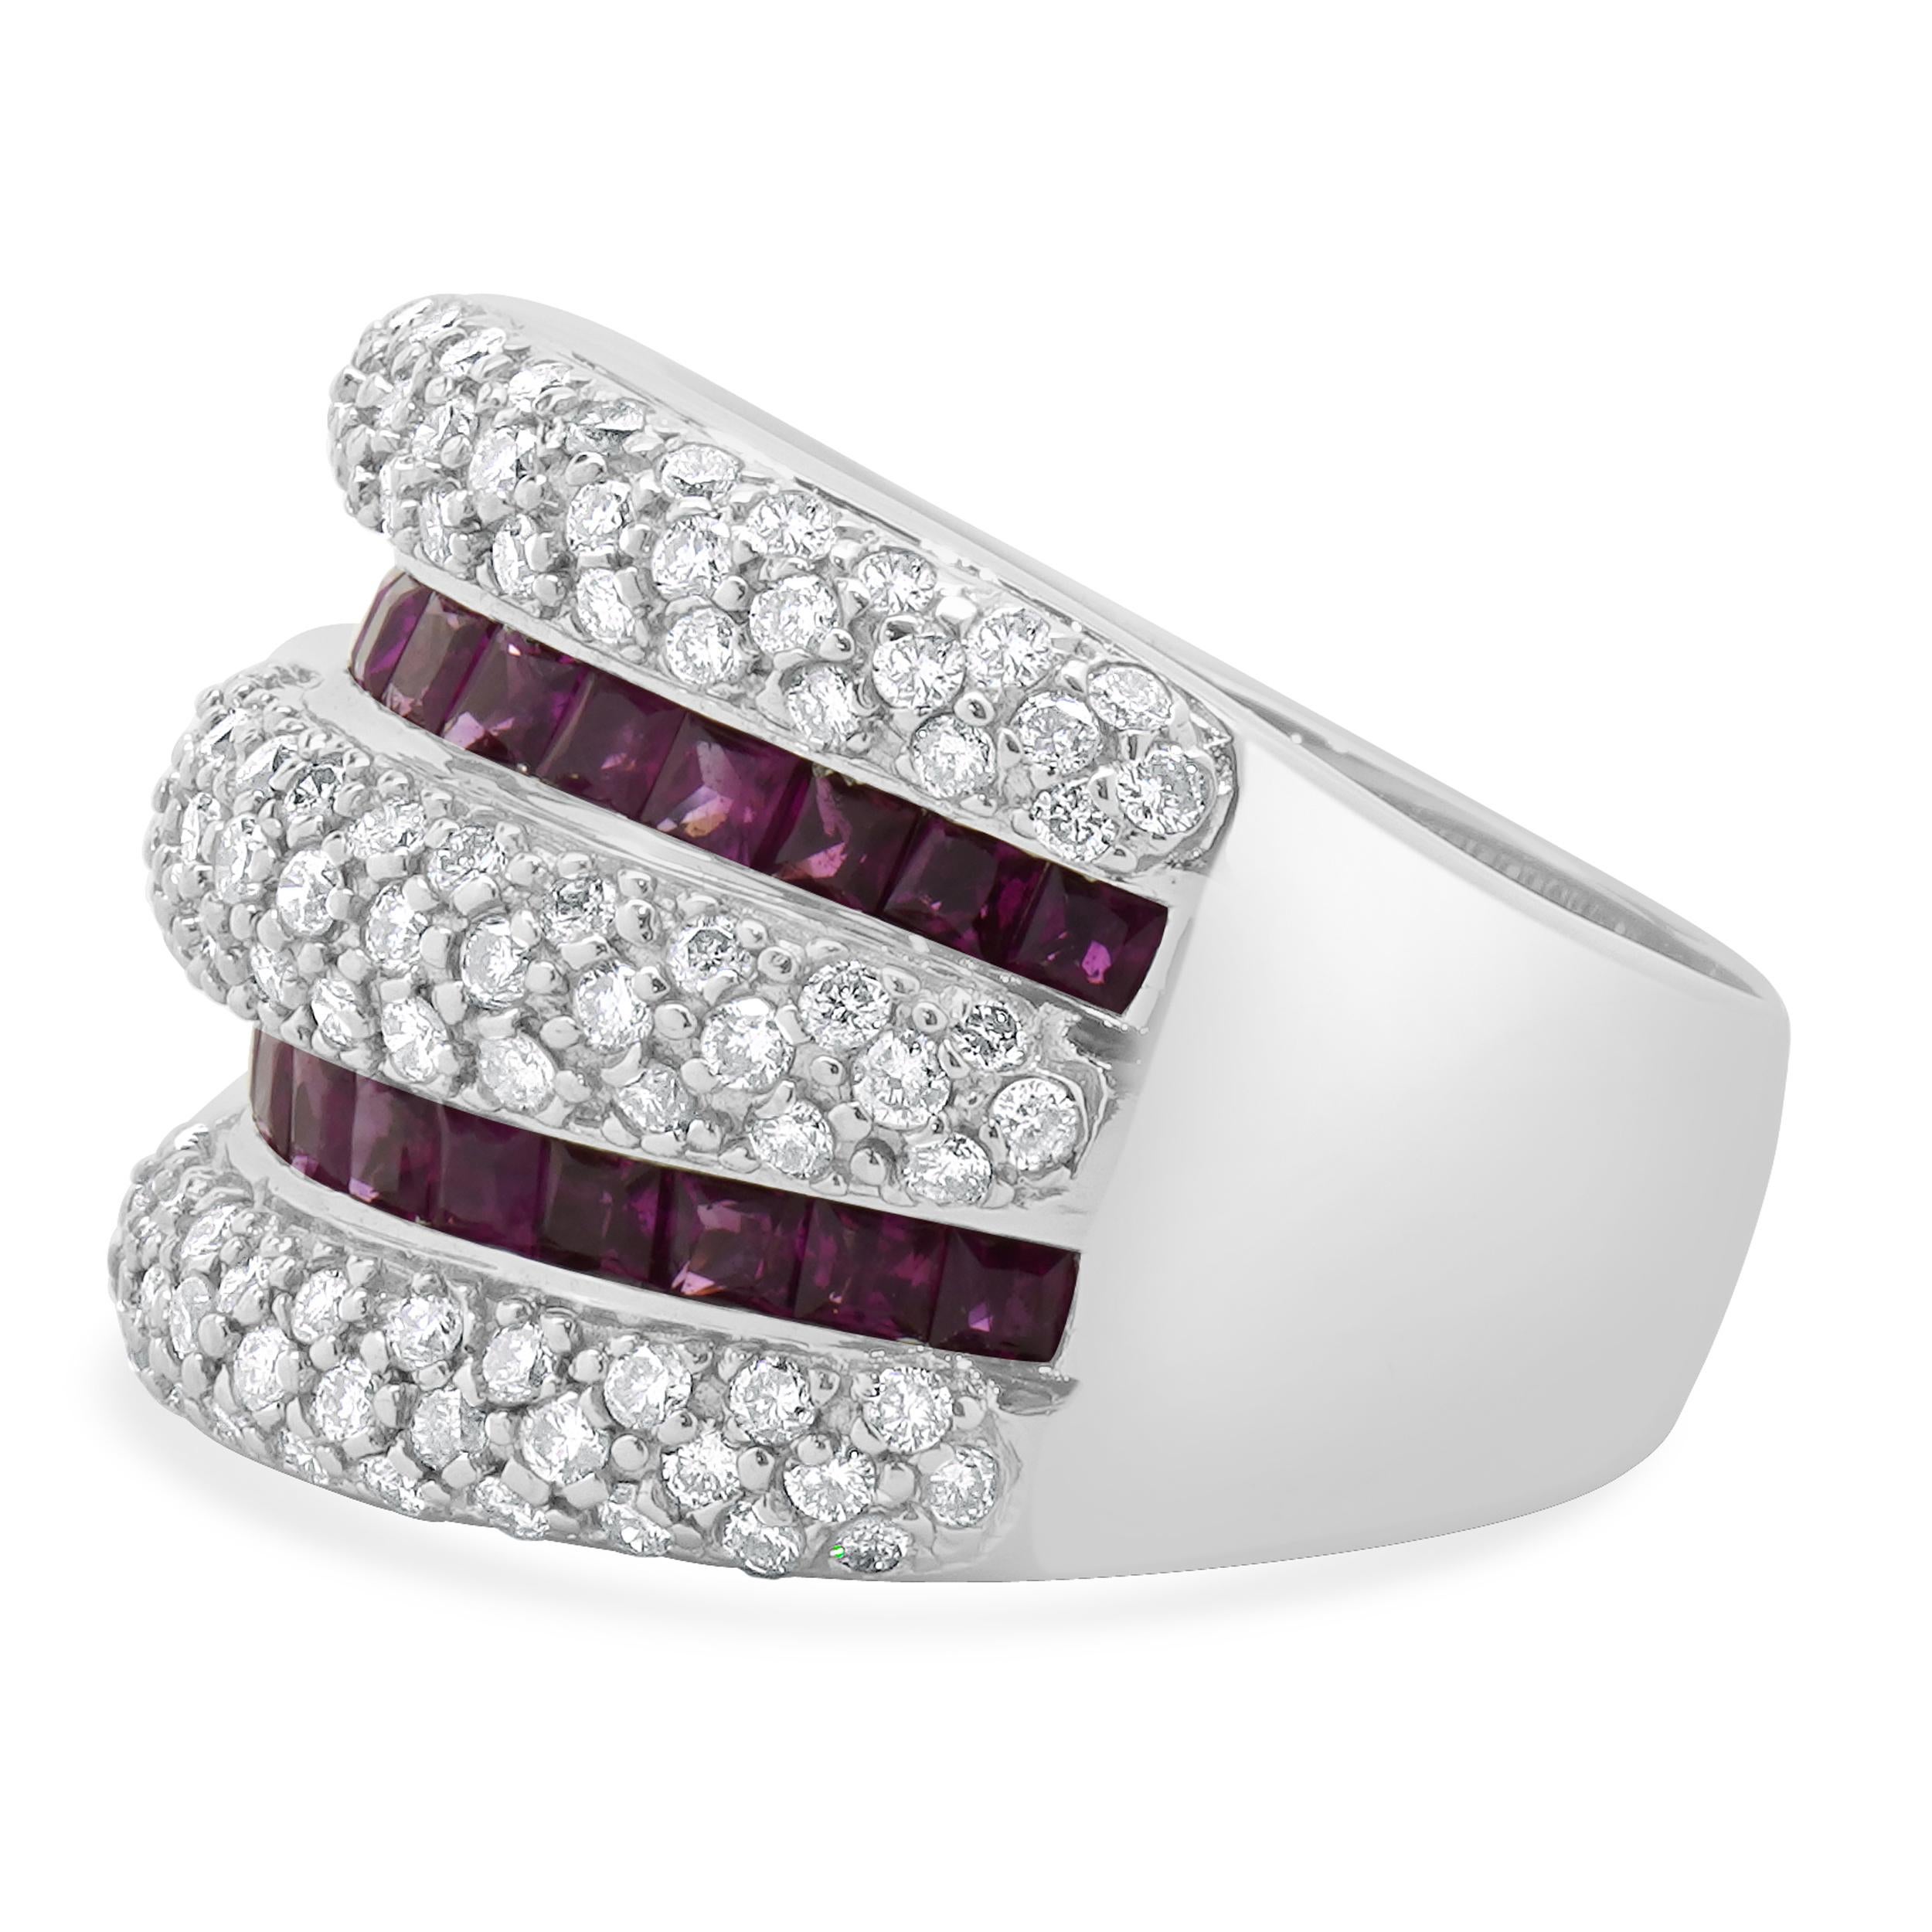 Designer: custom
Material: 14K white gold
Diamonds: 50 round brilliant cut = 0.50cttw
Color: I
Clarity: I1
Ruby: 28 princess cut = 1.50cttw
Dimensions: ring top measures 16.6mm wide
Ring Size: 6.75 (complimentary sizing available)
Weight: 13.24